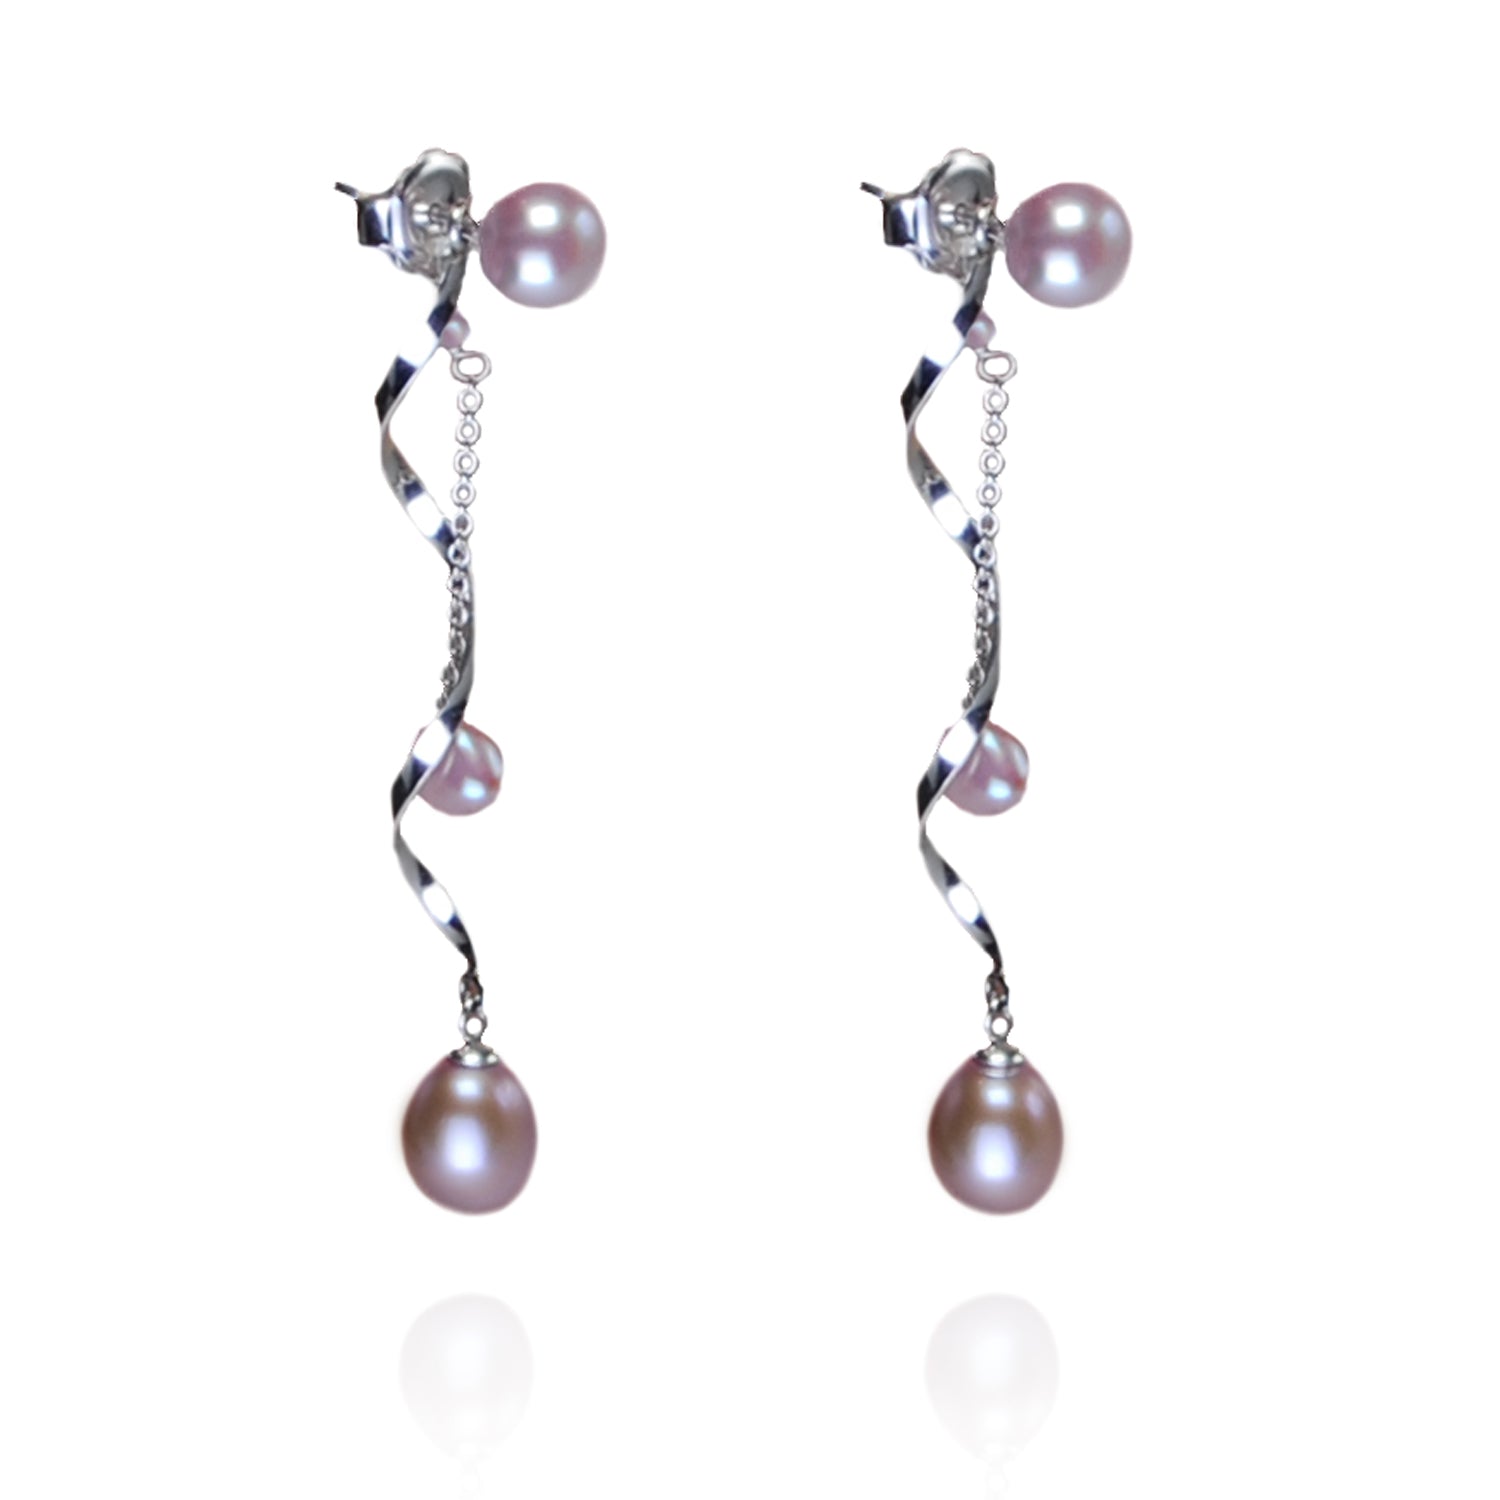 Freshwater Pearl earrings with optional long Silver Swirl & Chain Pearl Drop in Pink